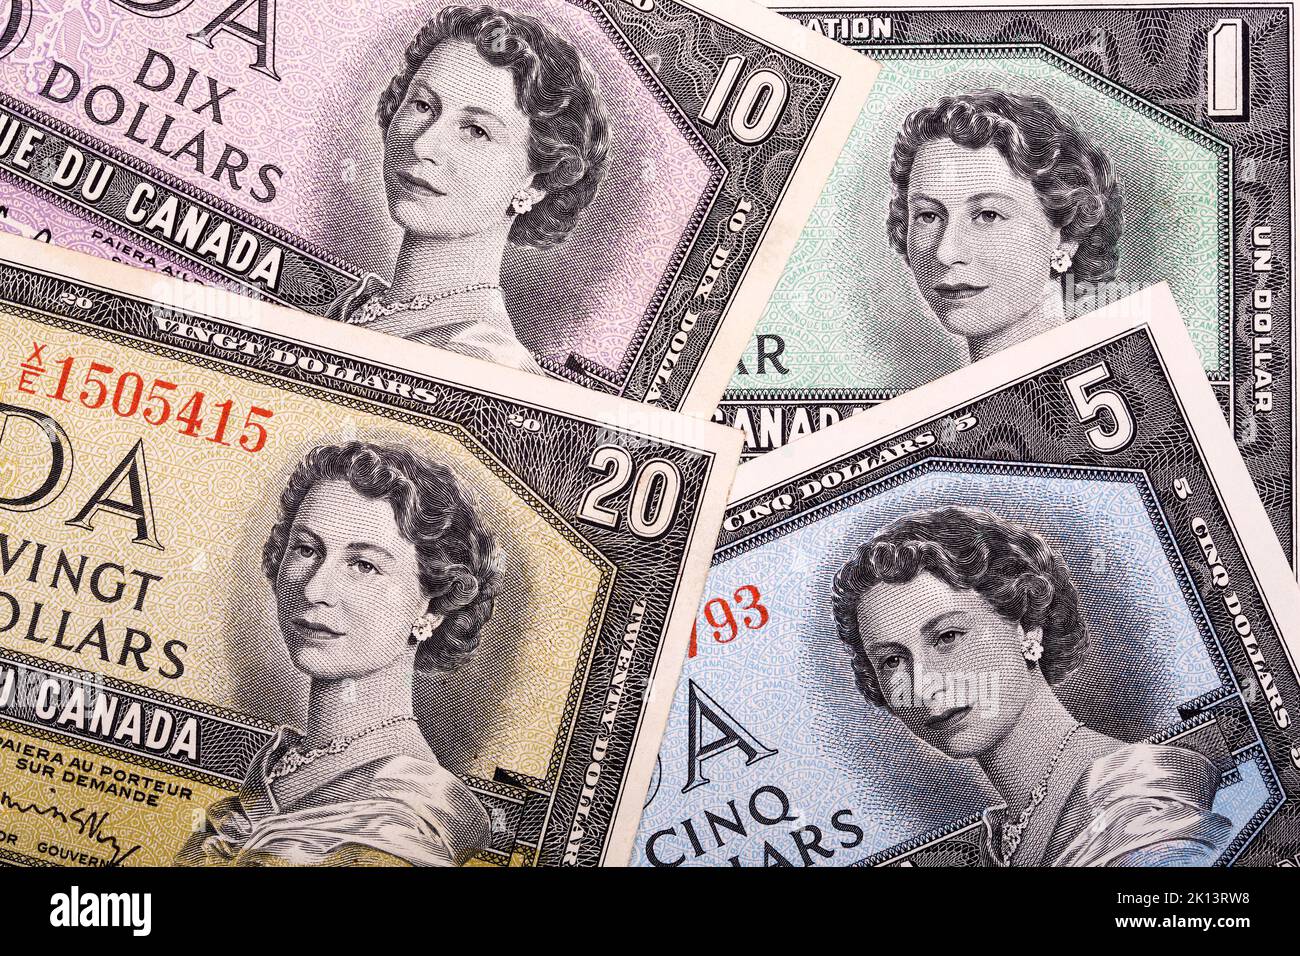 Old Canadian money - Dollars a business background Stock Photo